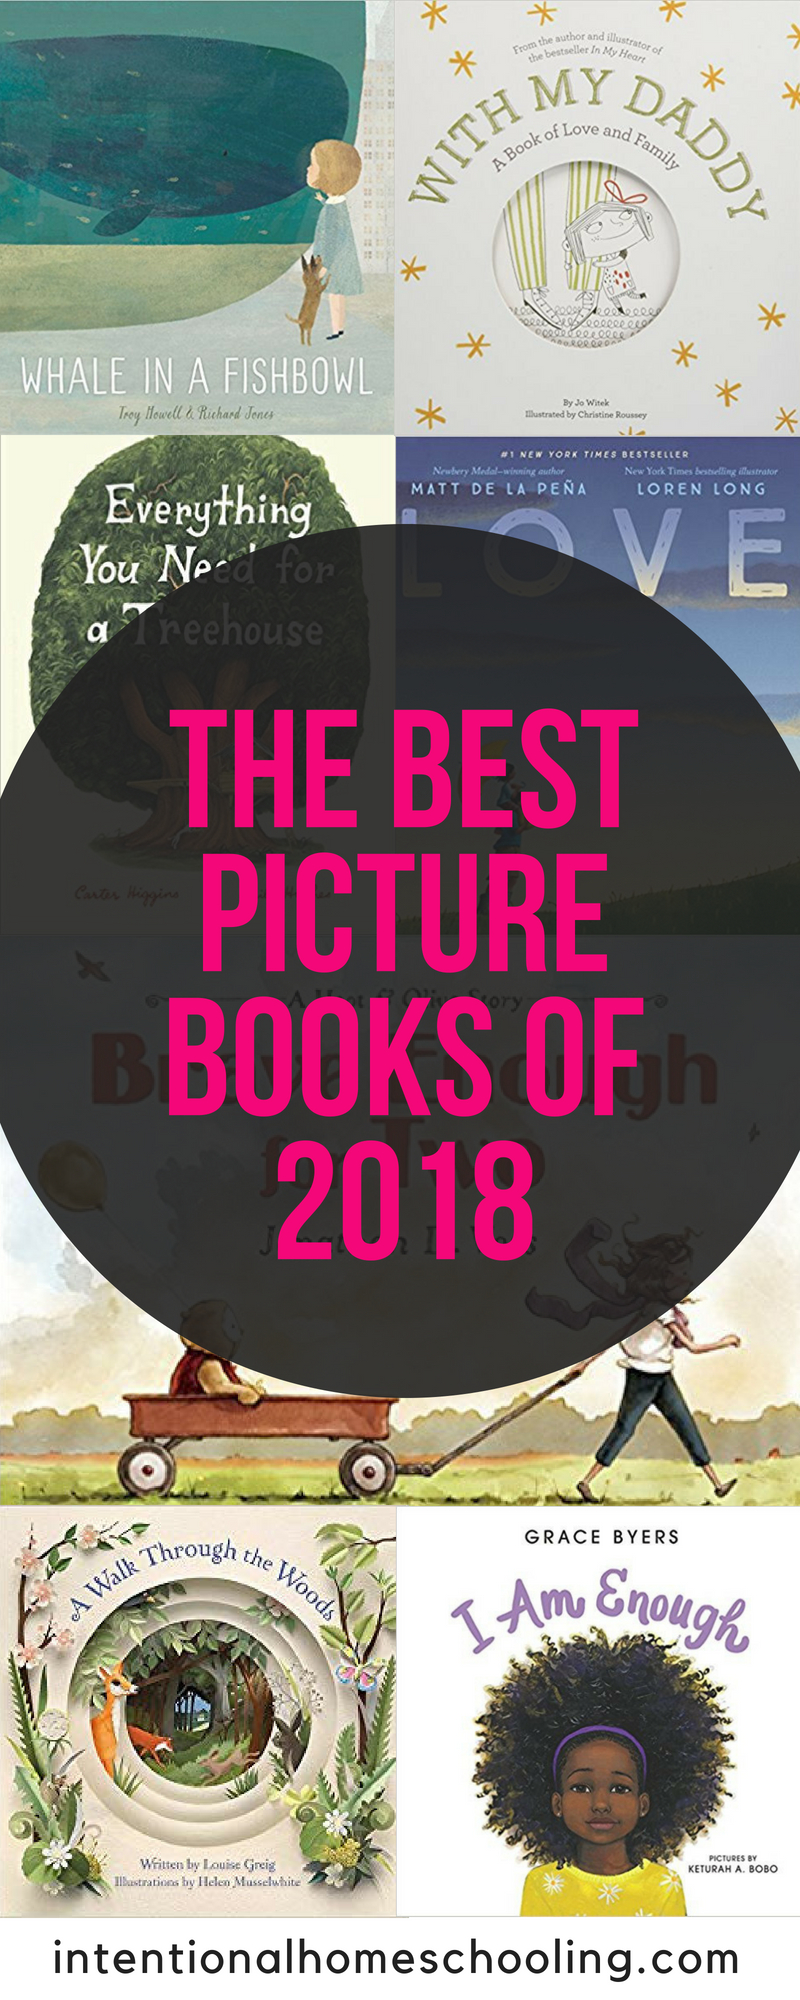 Check out these awesome picture books that have been published in 2018 - the best picture books of 2018.